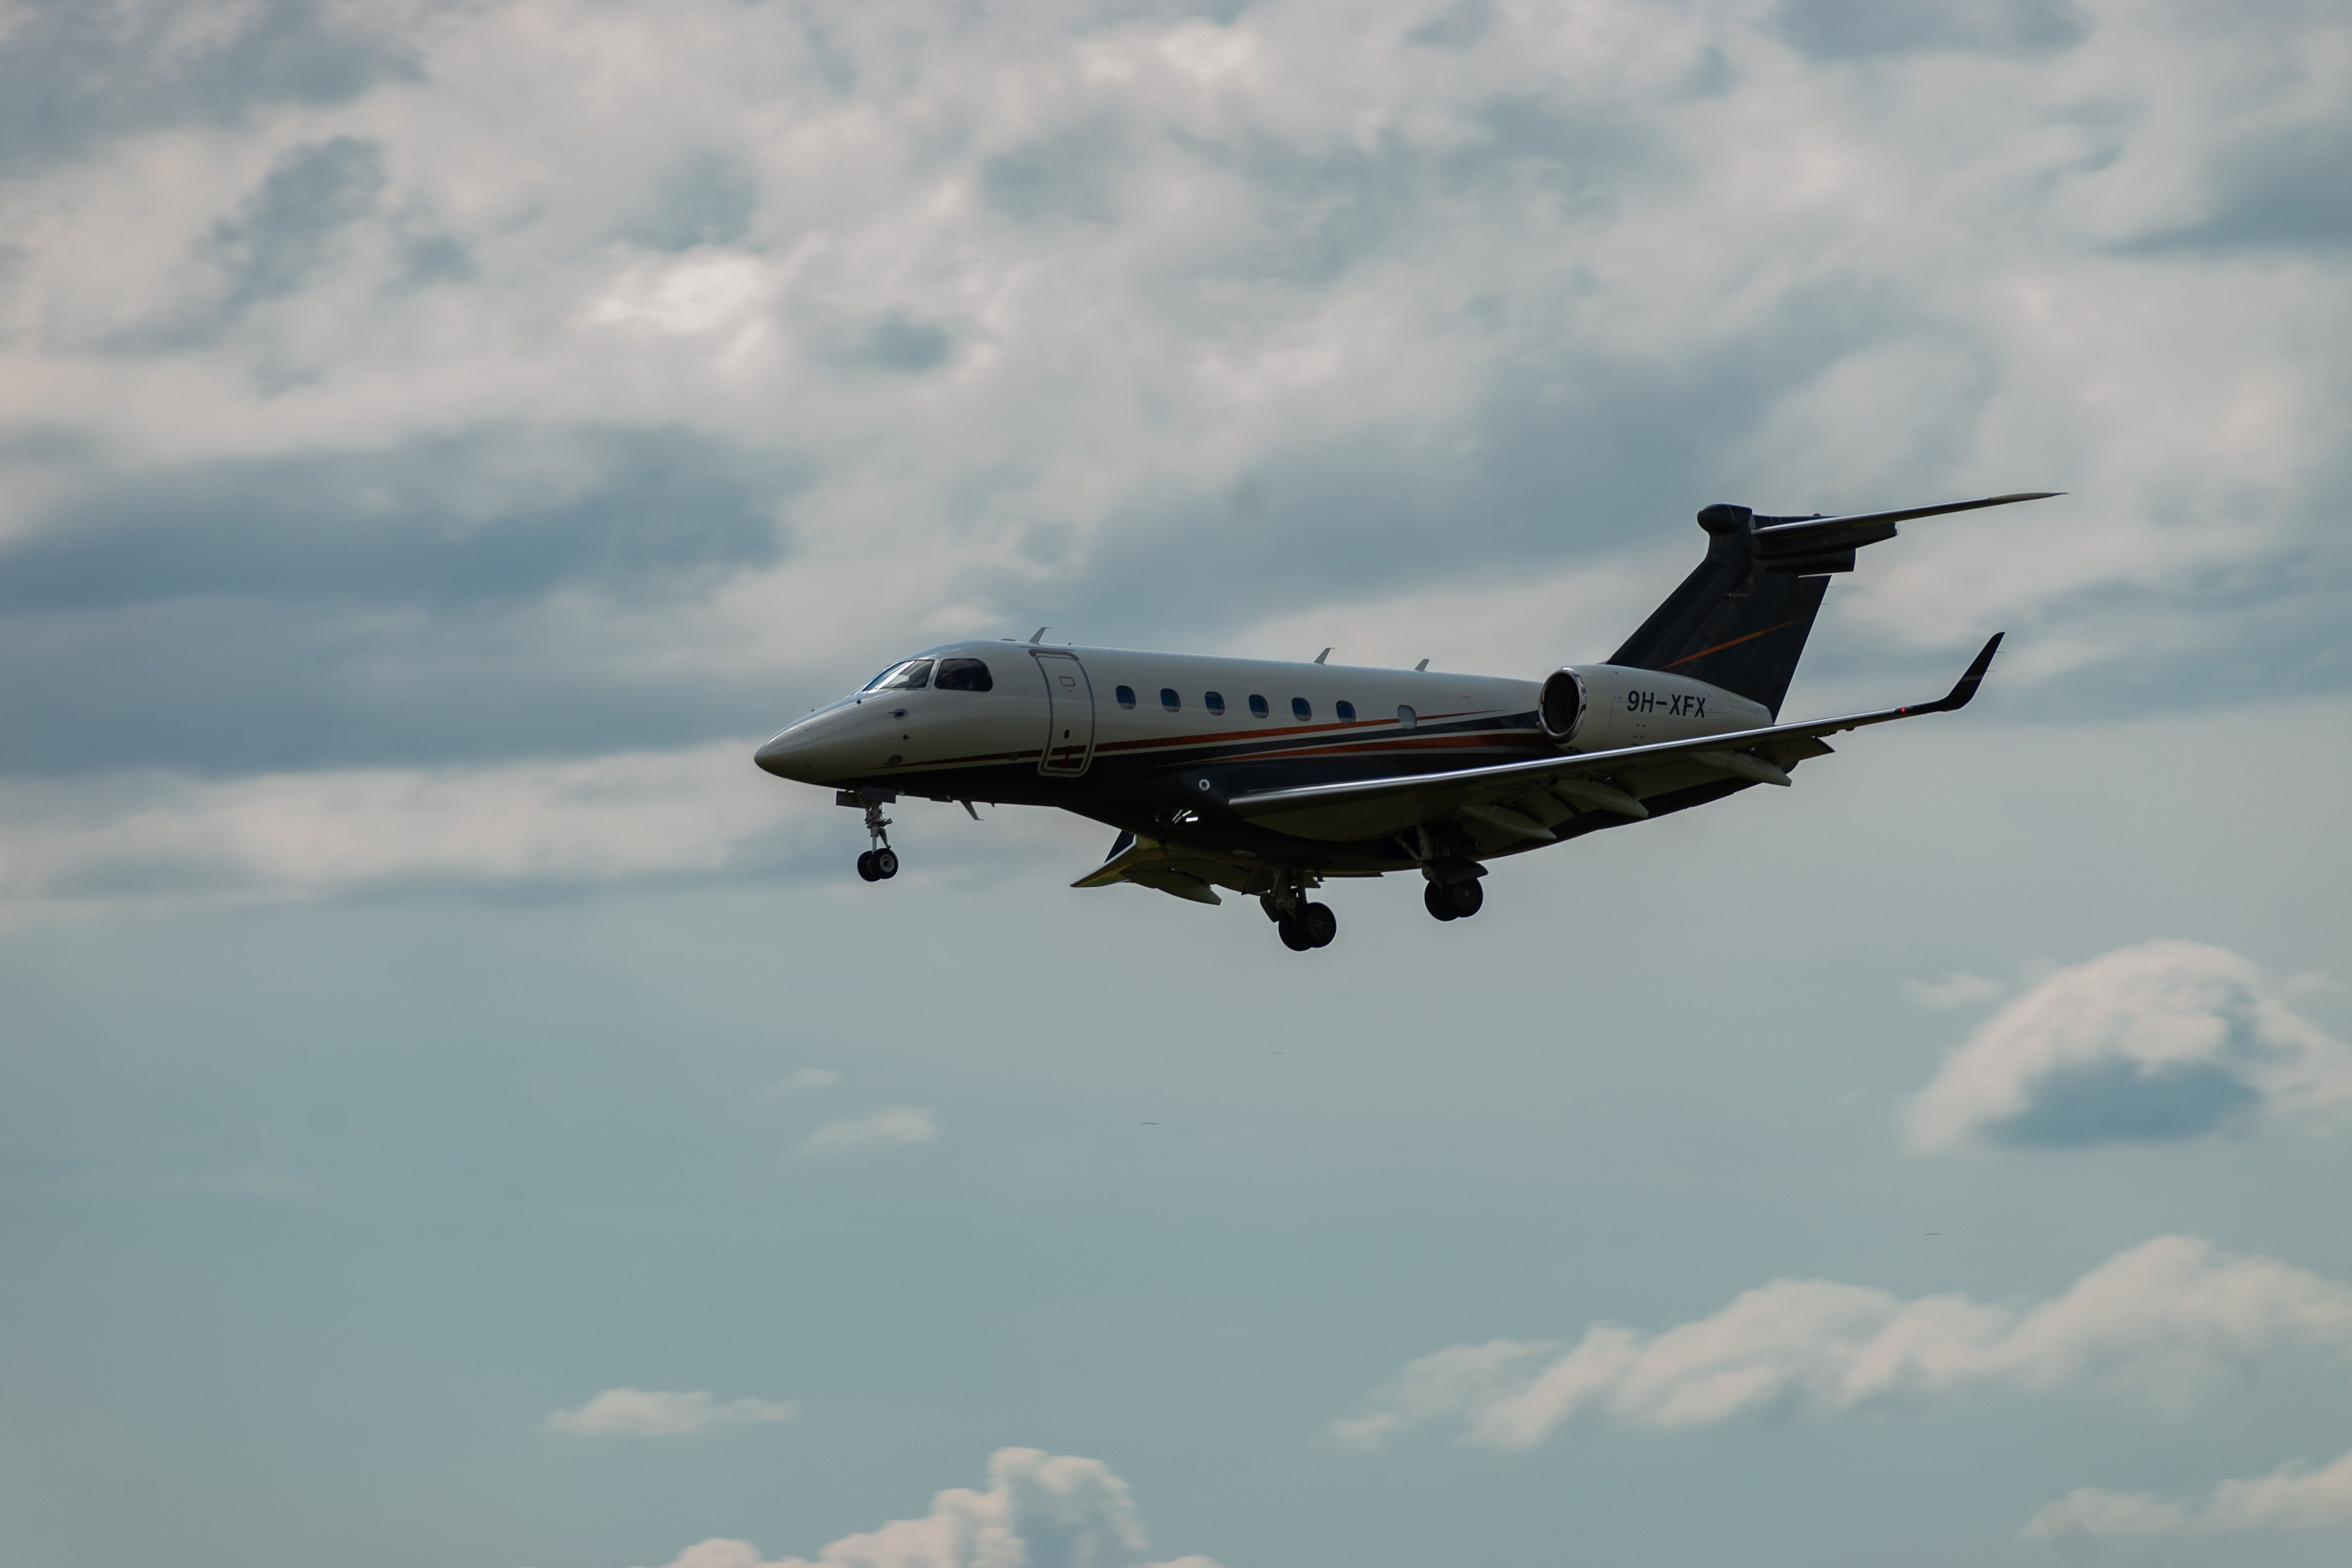 9H-XFX Embraer Legacy 500 aircraft is landing on runway 14